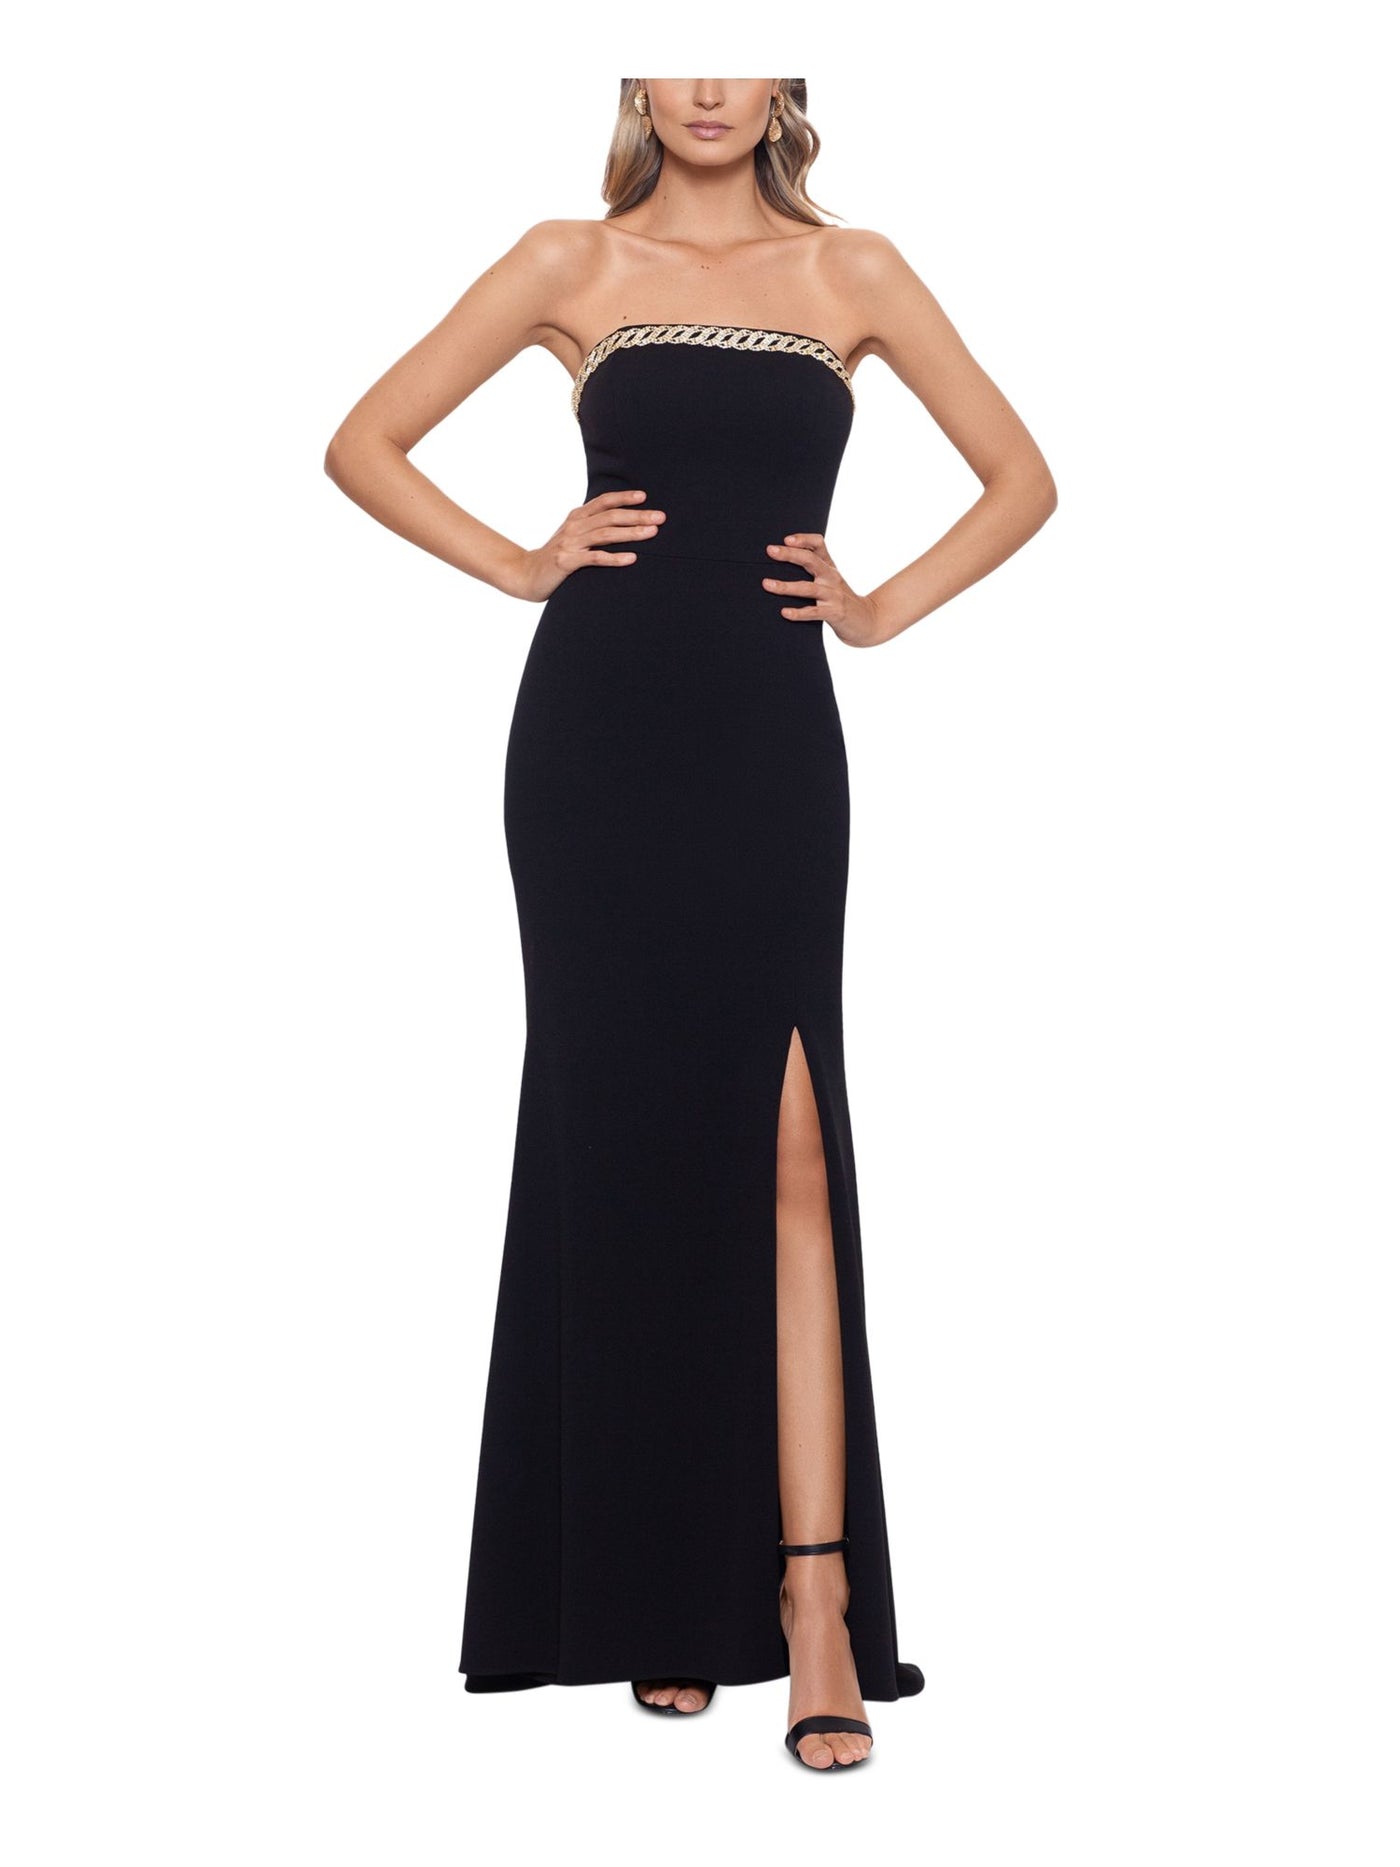 XSCAPE Womens Black Stretch Embellished Zippered Scuba Crepe Slitted Lined Sleeveless Strapless Full-Length Evening Fit + Flare Dress 6